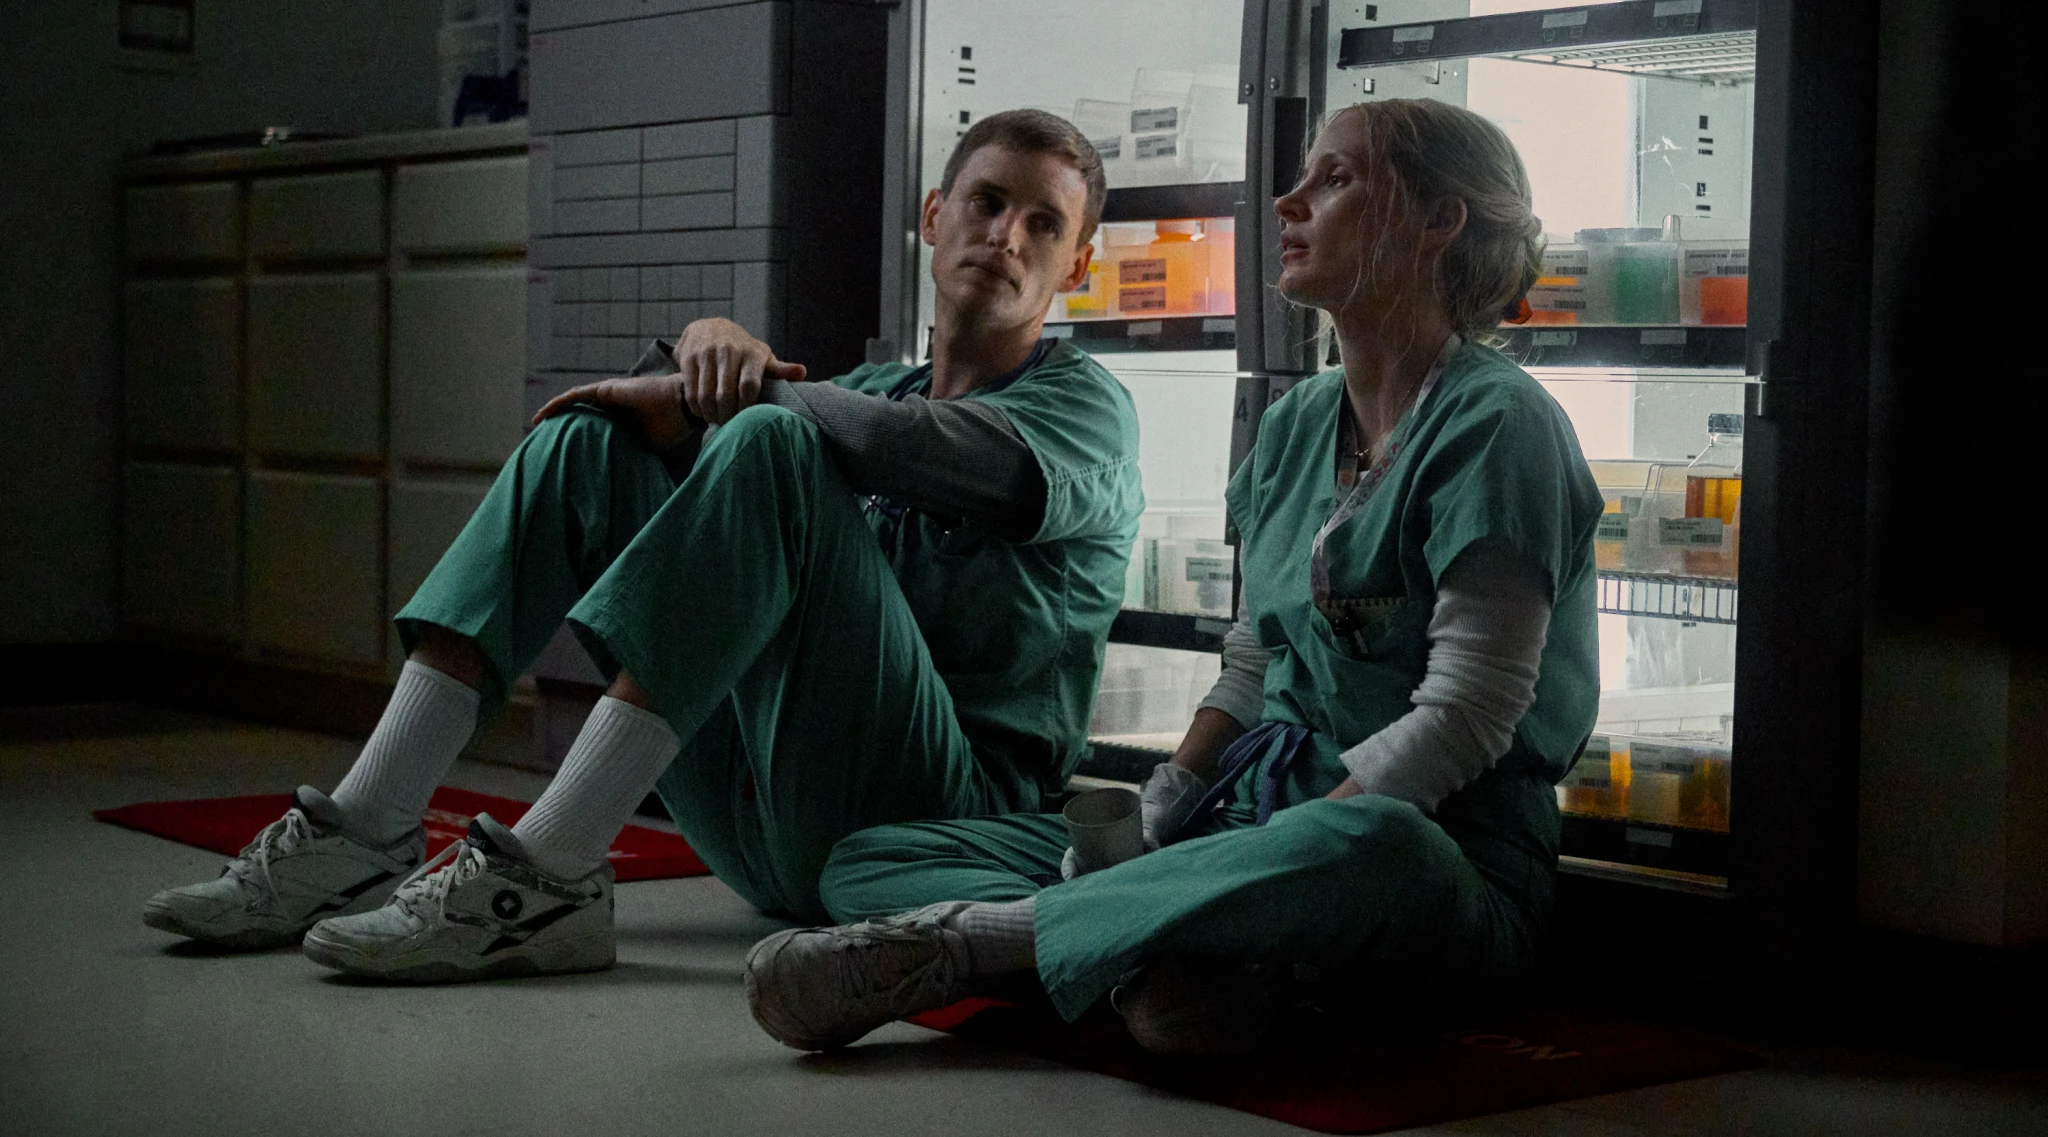 Jessica Chastain and Eddie Redmayne Take on Chilling True Crime in 'The Good Nurse' Trailer